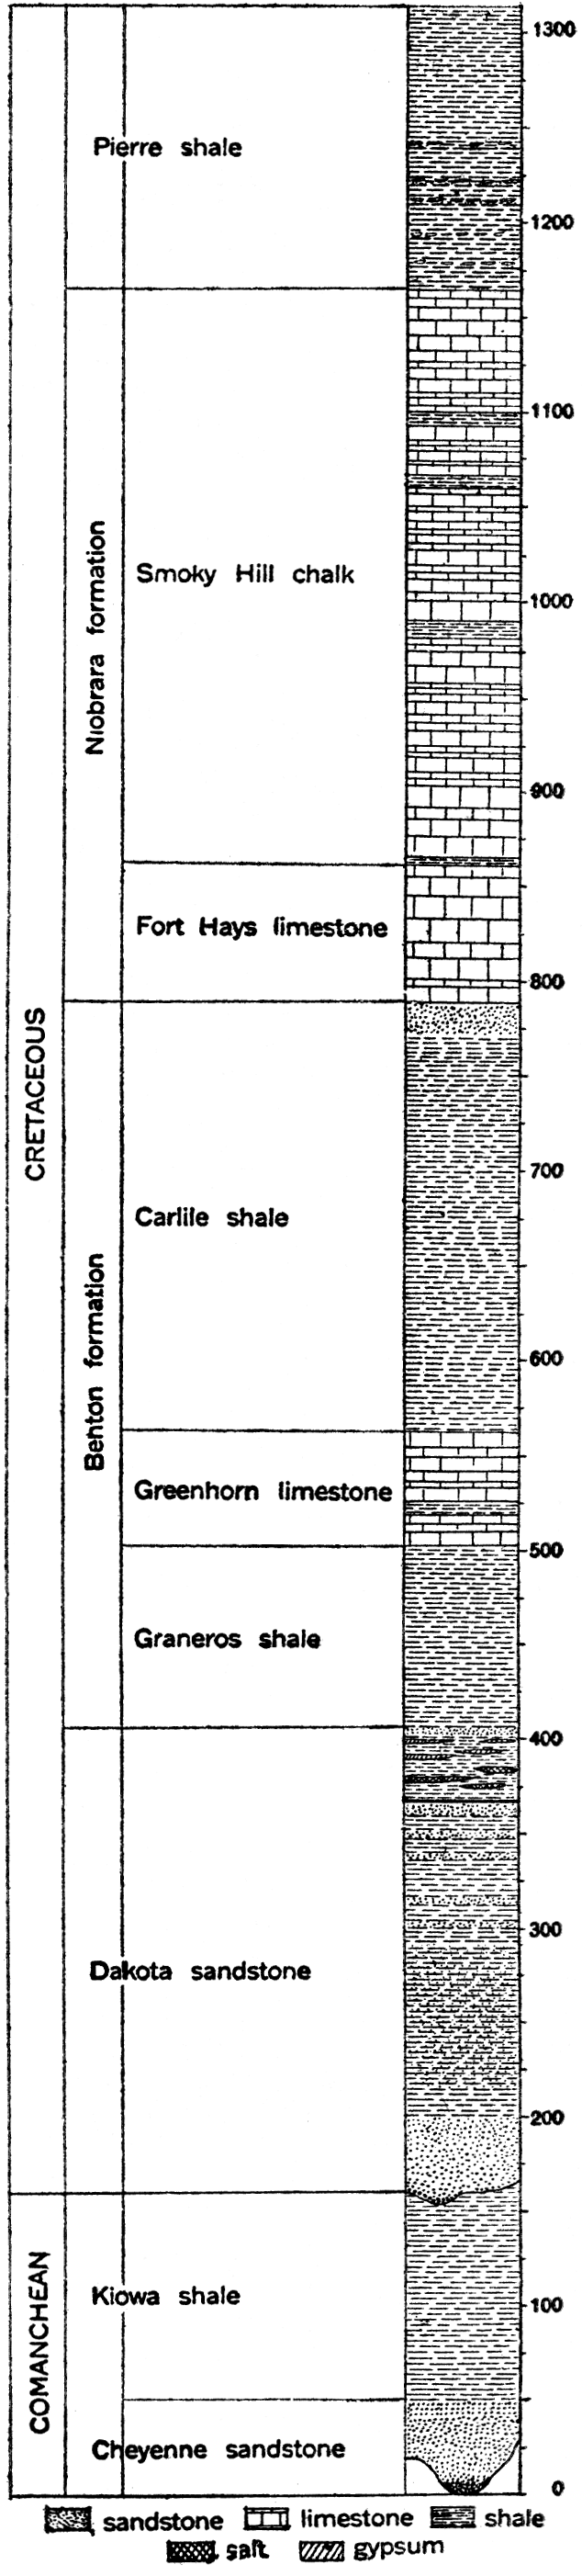 Generalized section of the Comanchean and Cretaceous systems in Kansas.